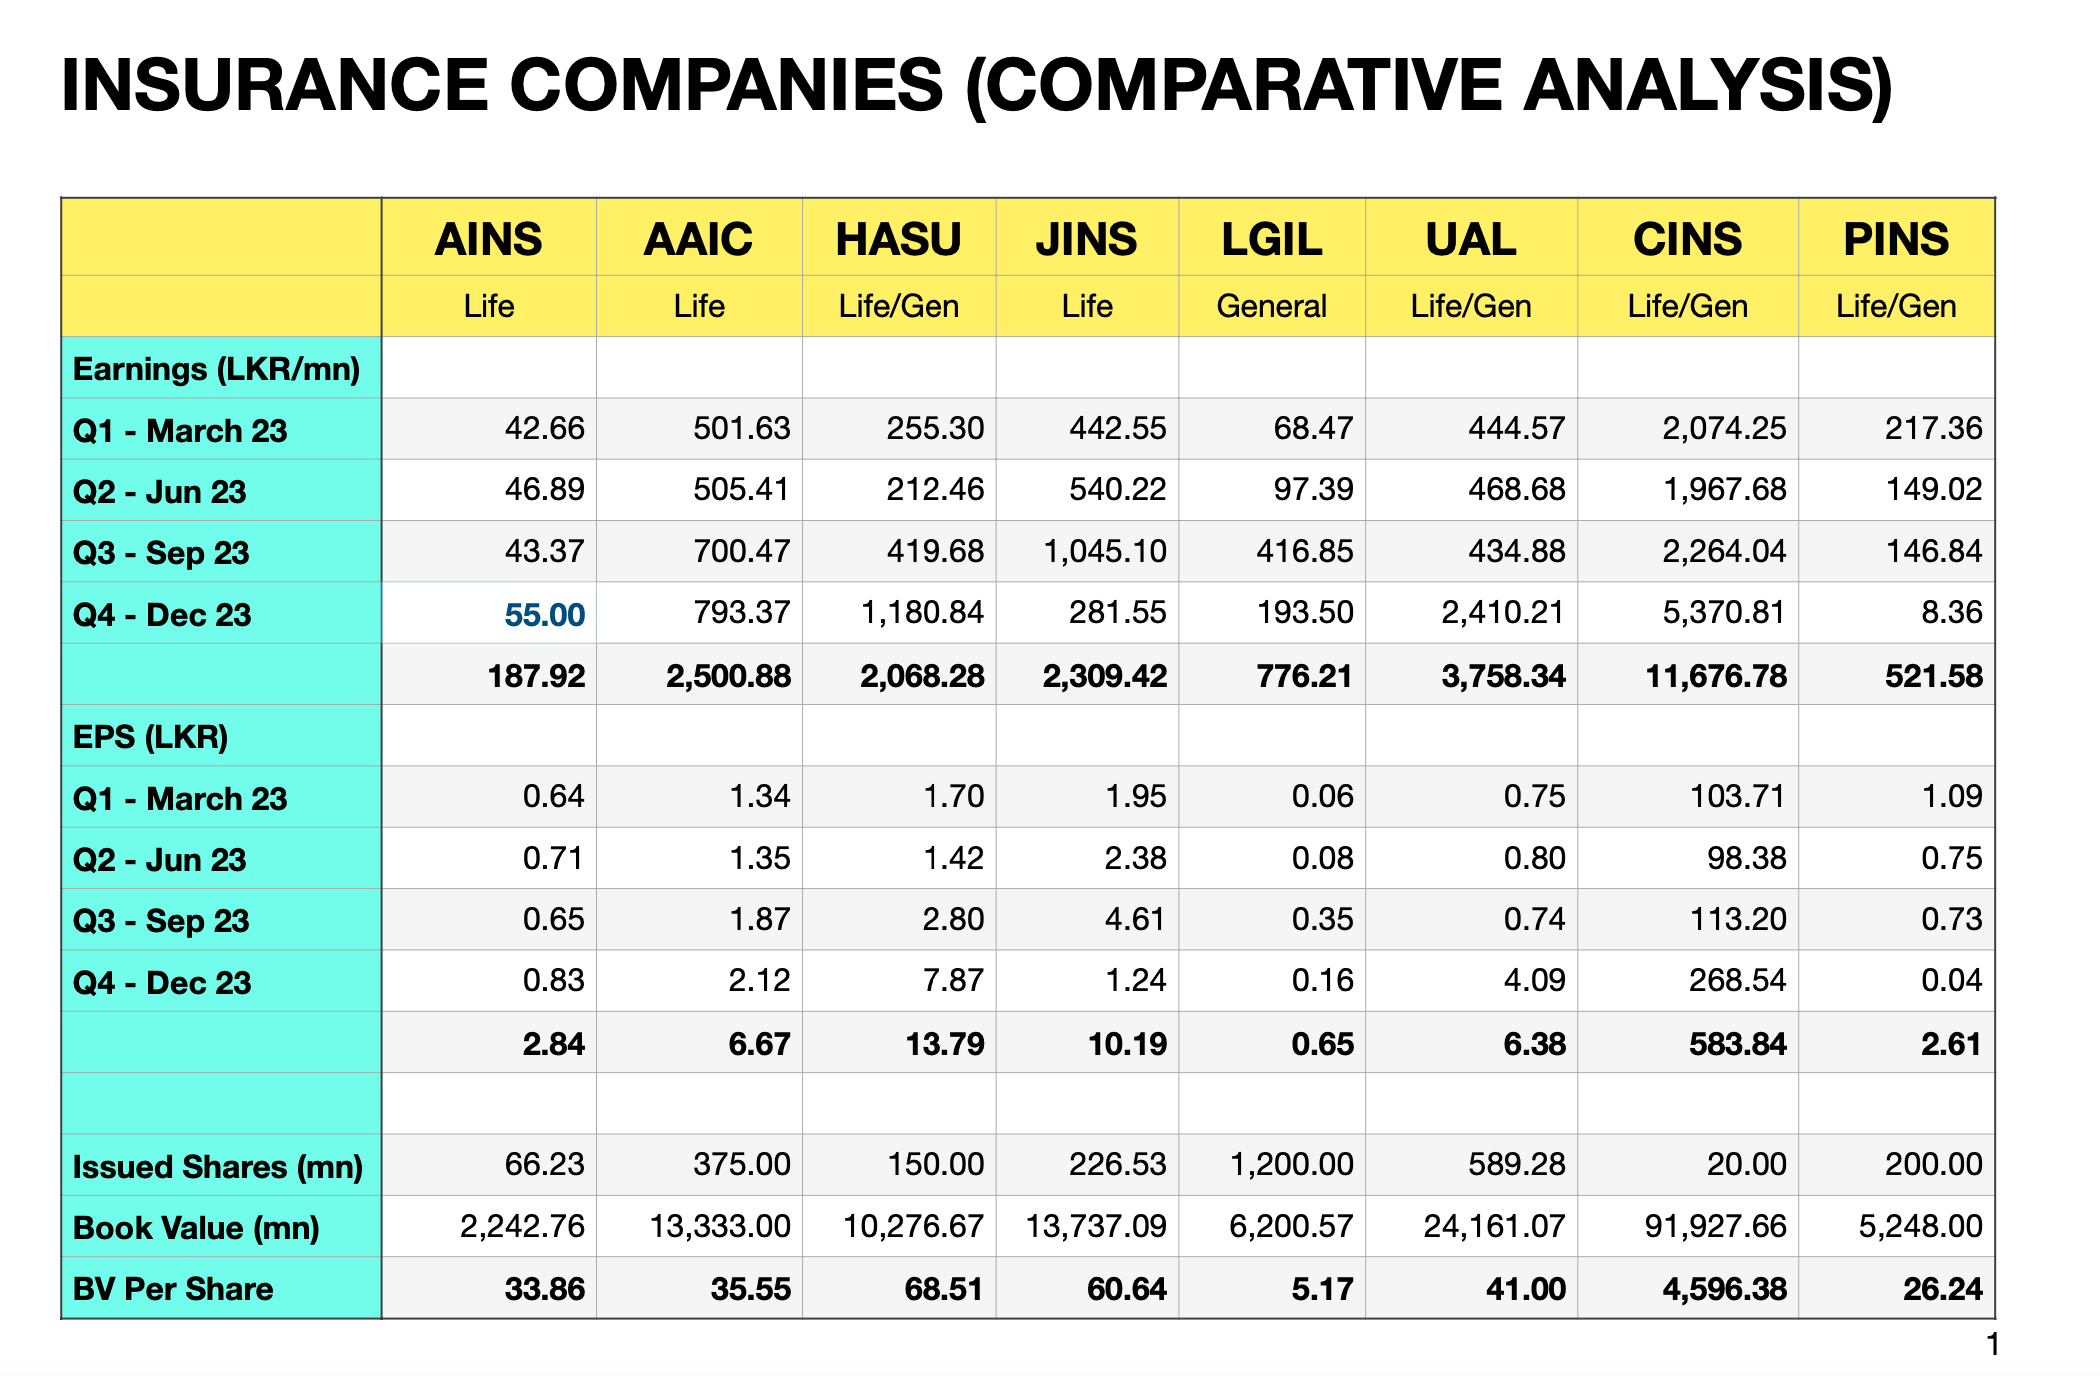 Comparative Analysis of the Insurance Companies